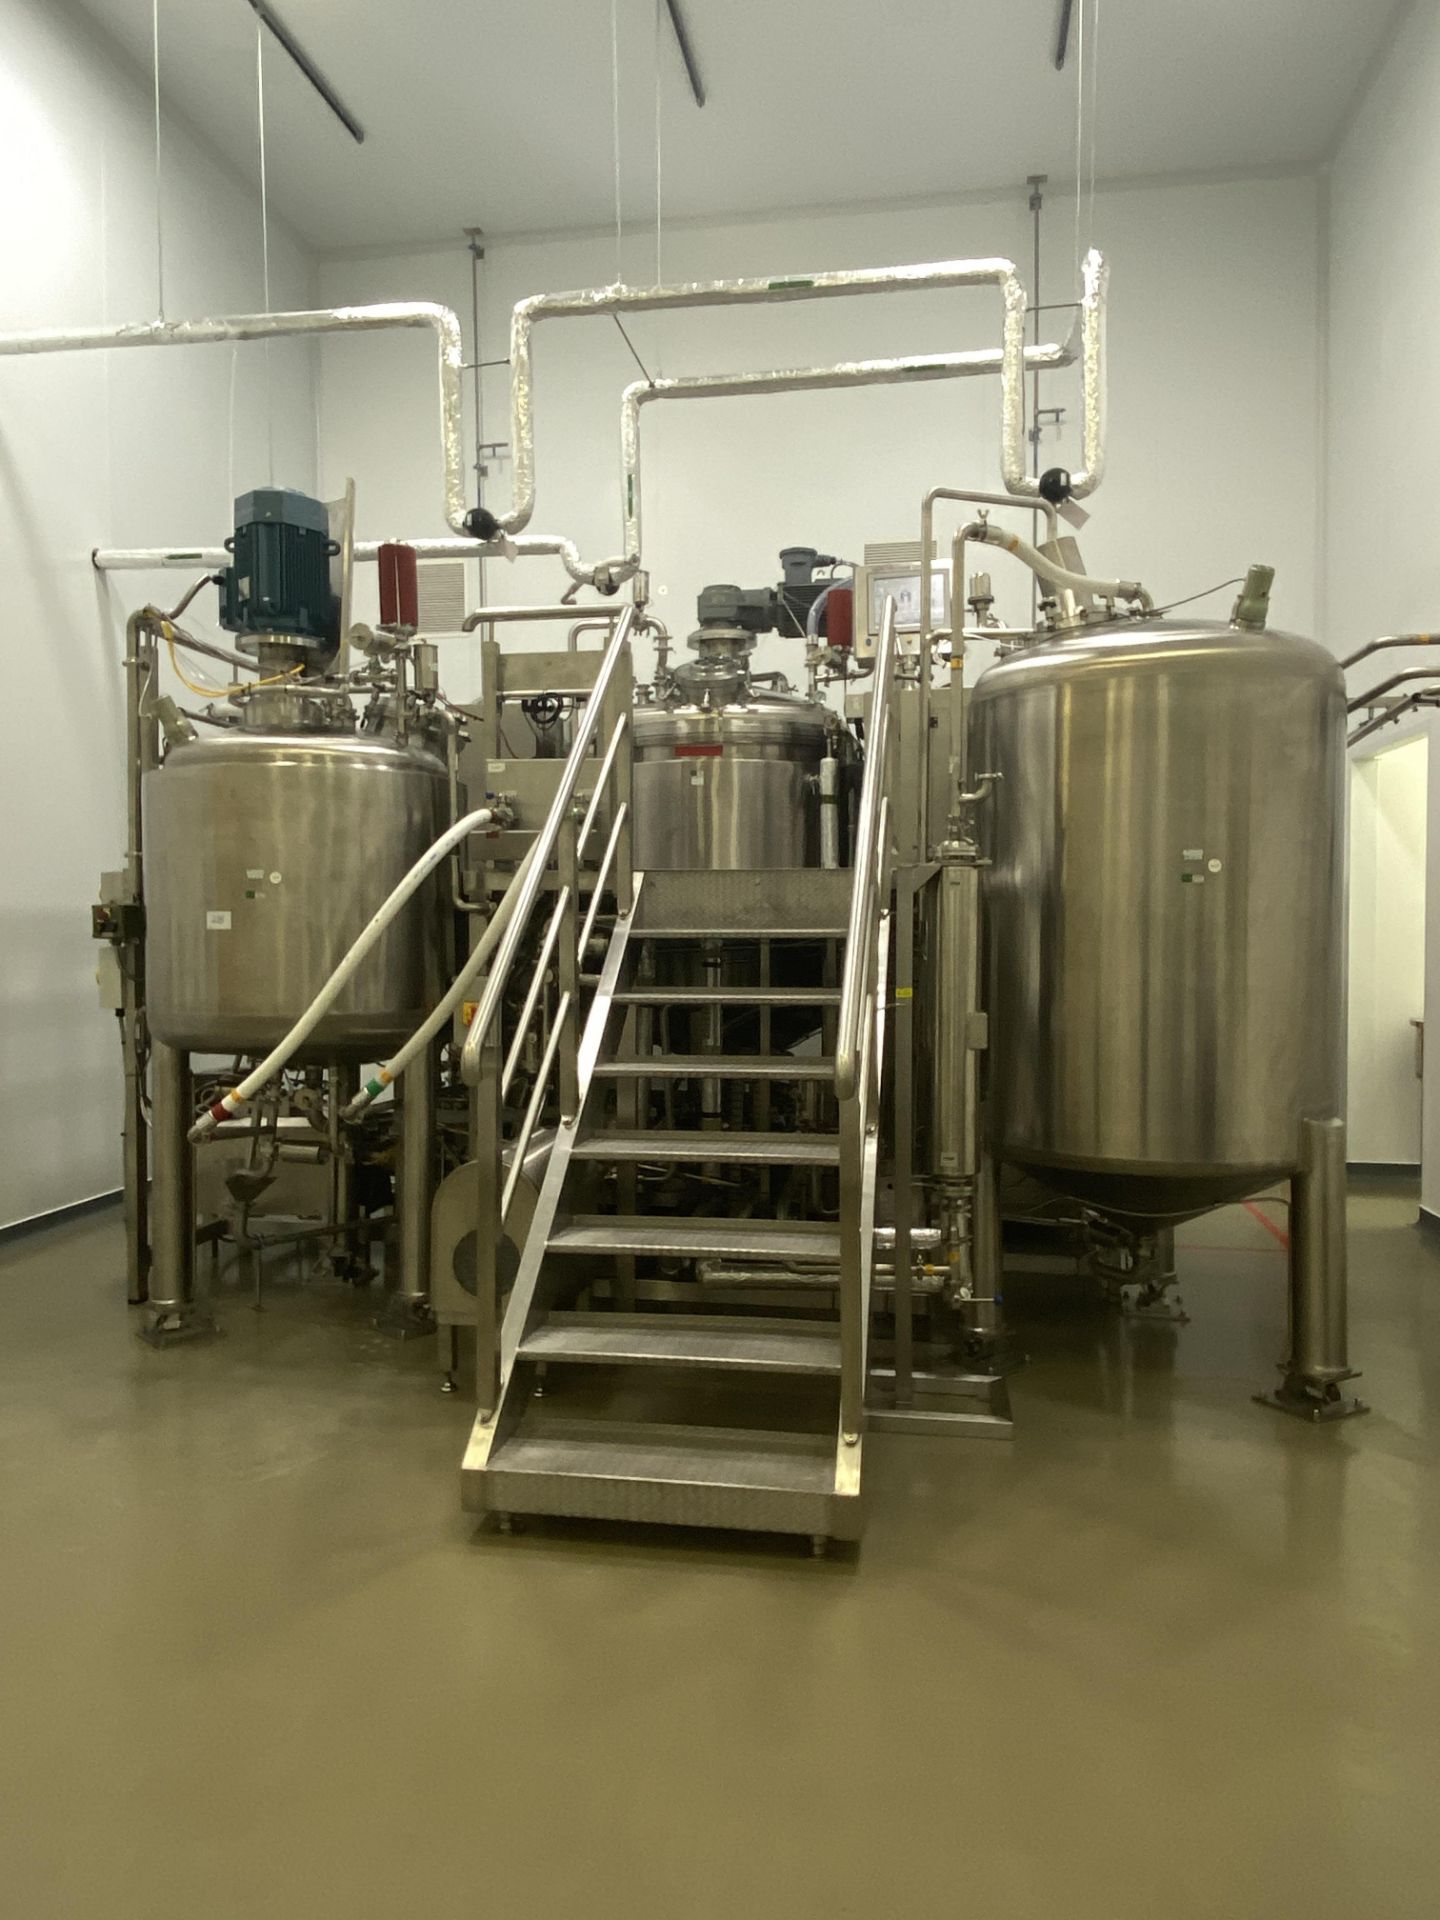 1, Chasing Model DSZL-2000QB Cream Manufacturing Plant Comprising Stainless Steel 2000 Litre Mixing